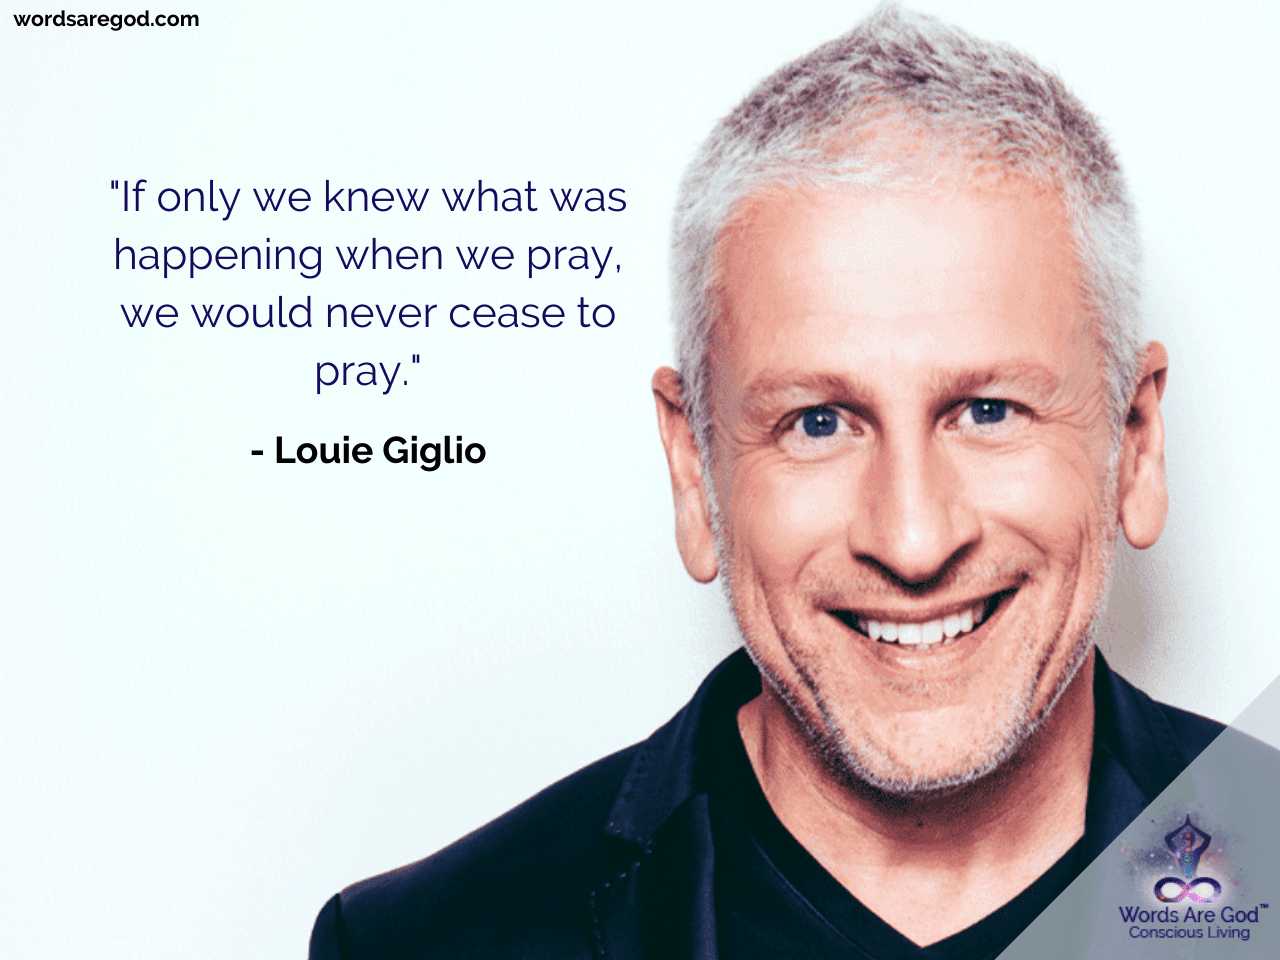 Louie Giglio Inspirational Quote by Louie Giglio